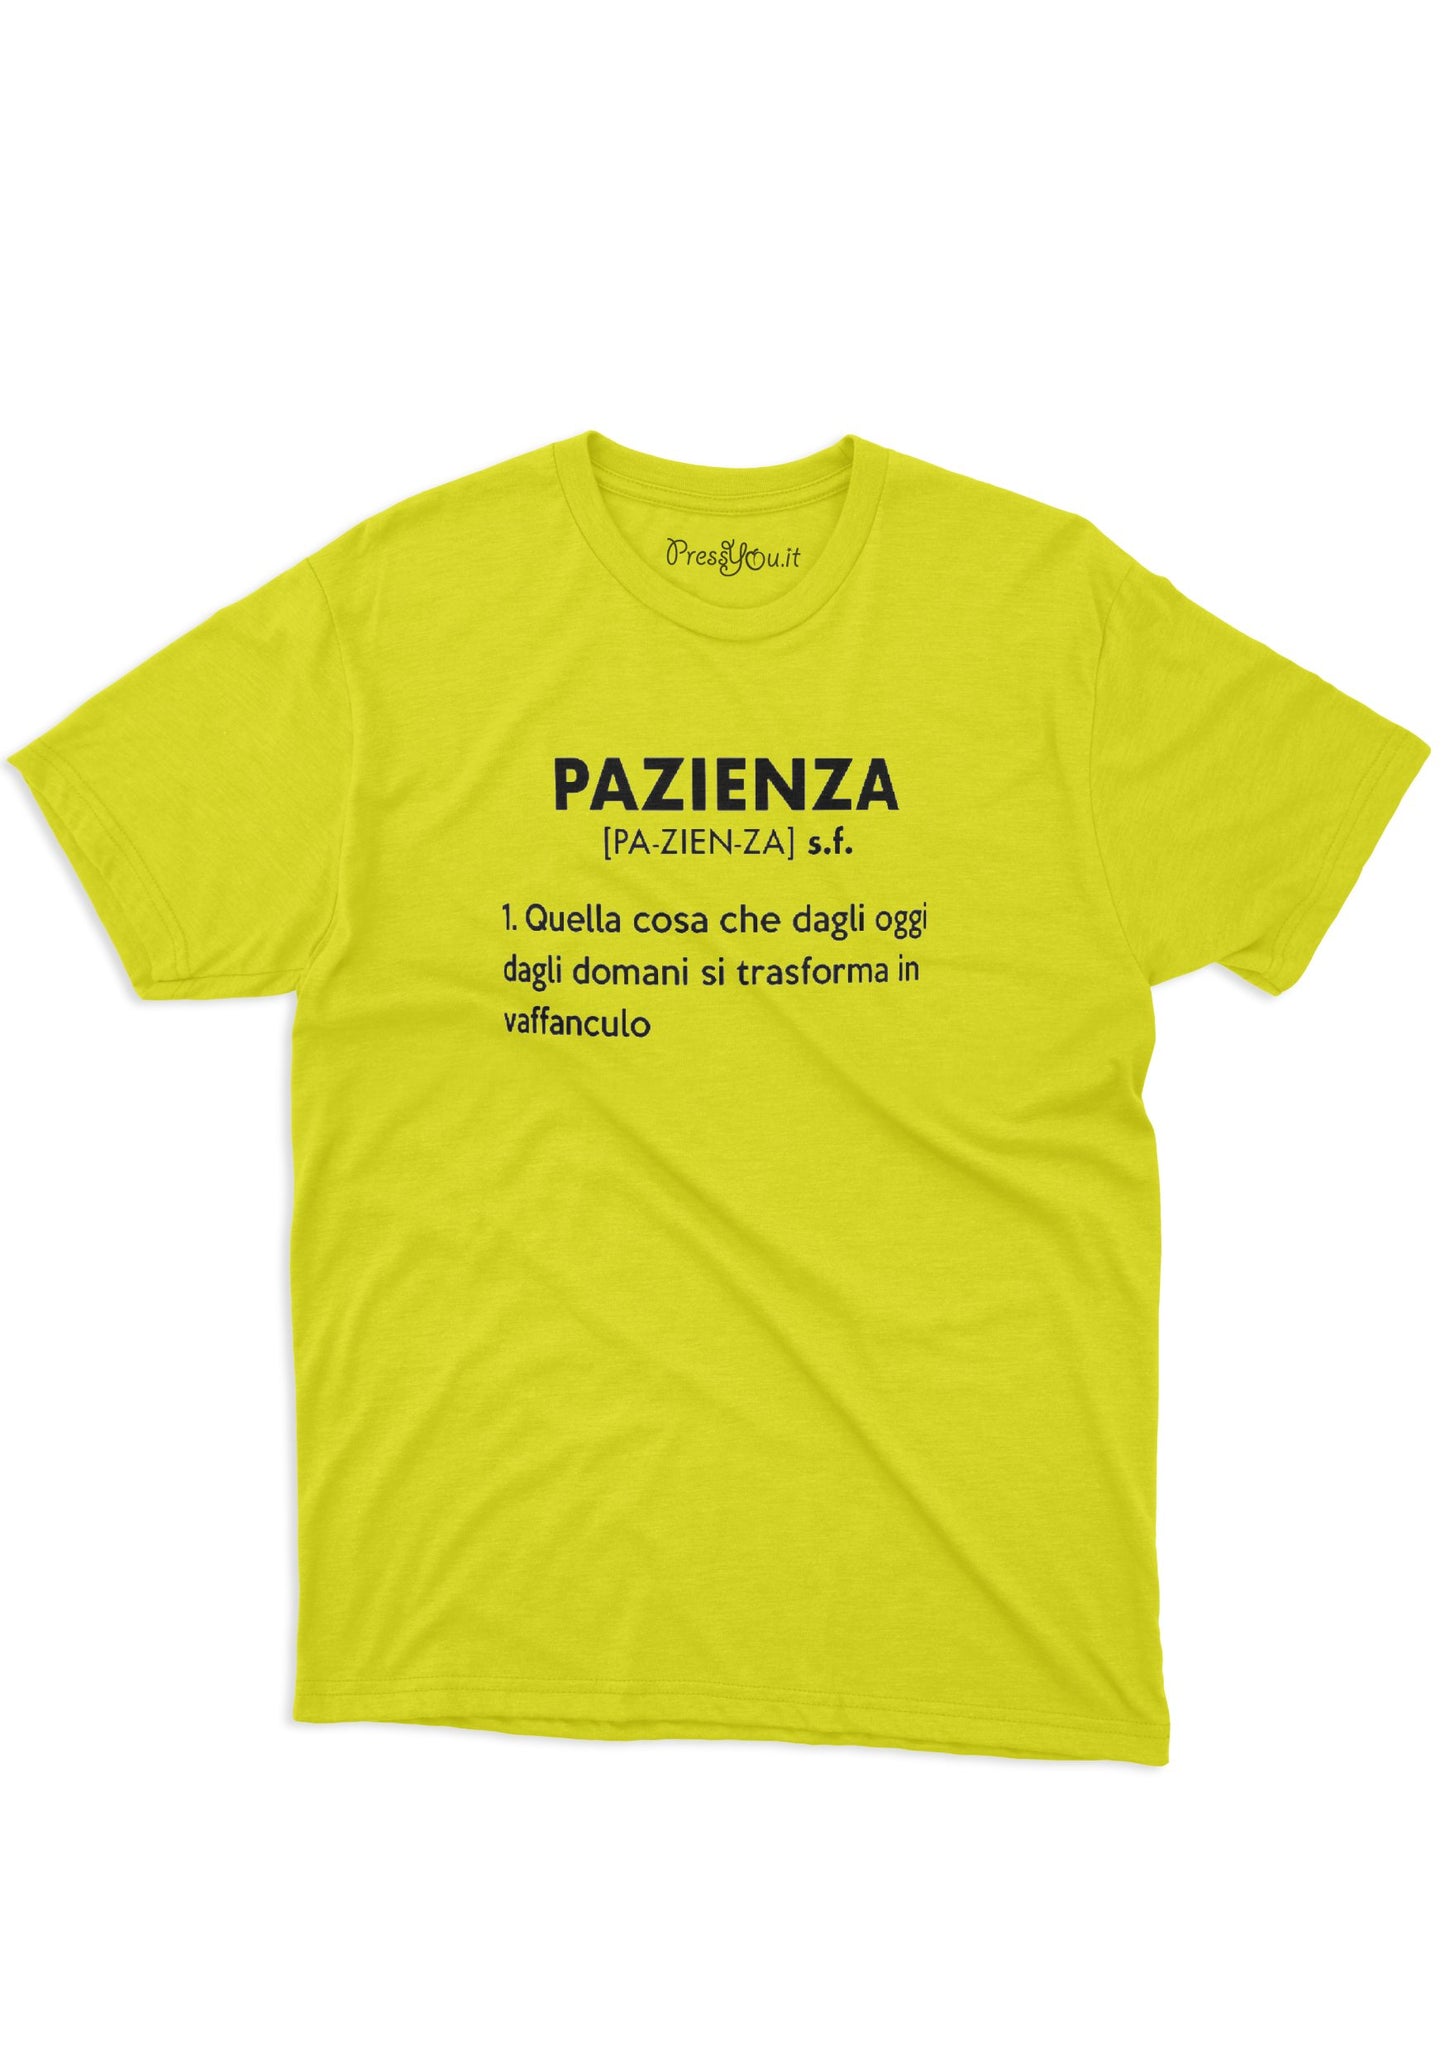 dictionary patience t-shirt